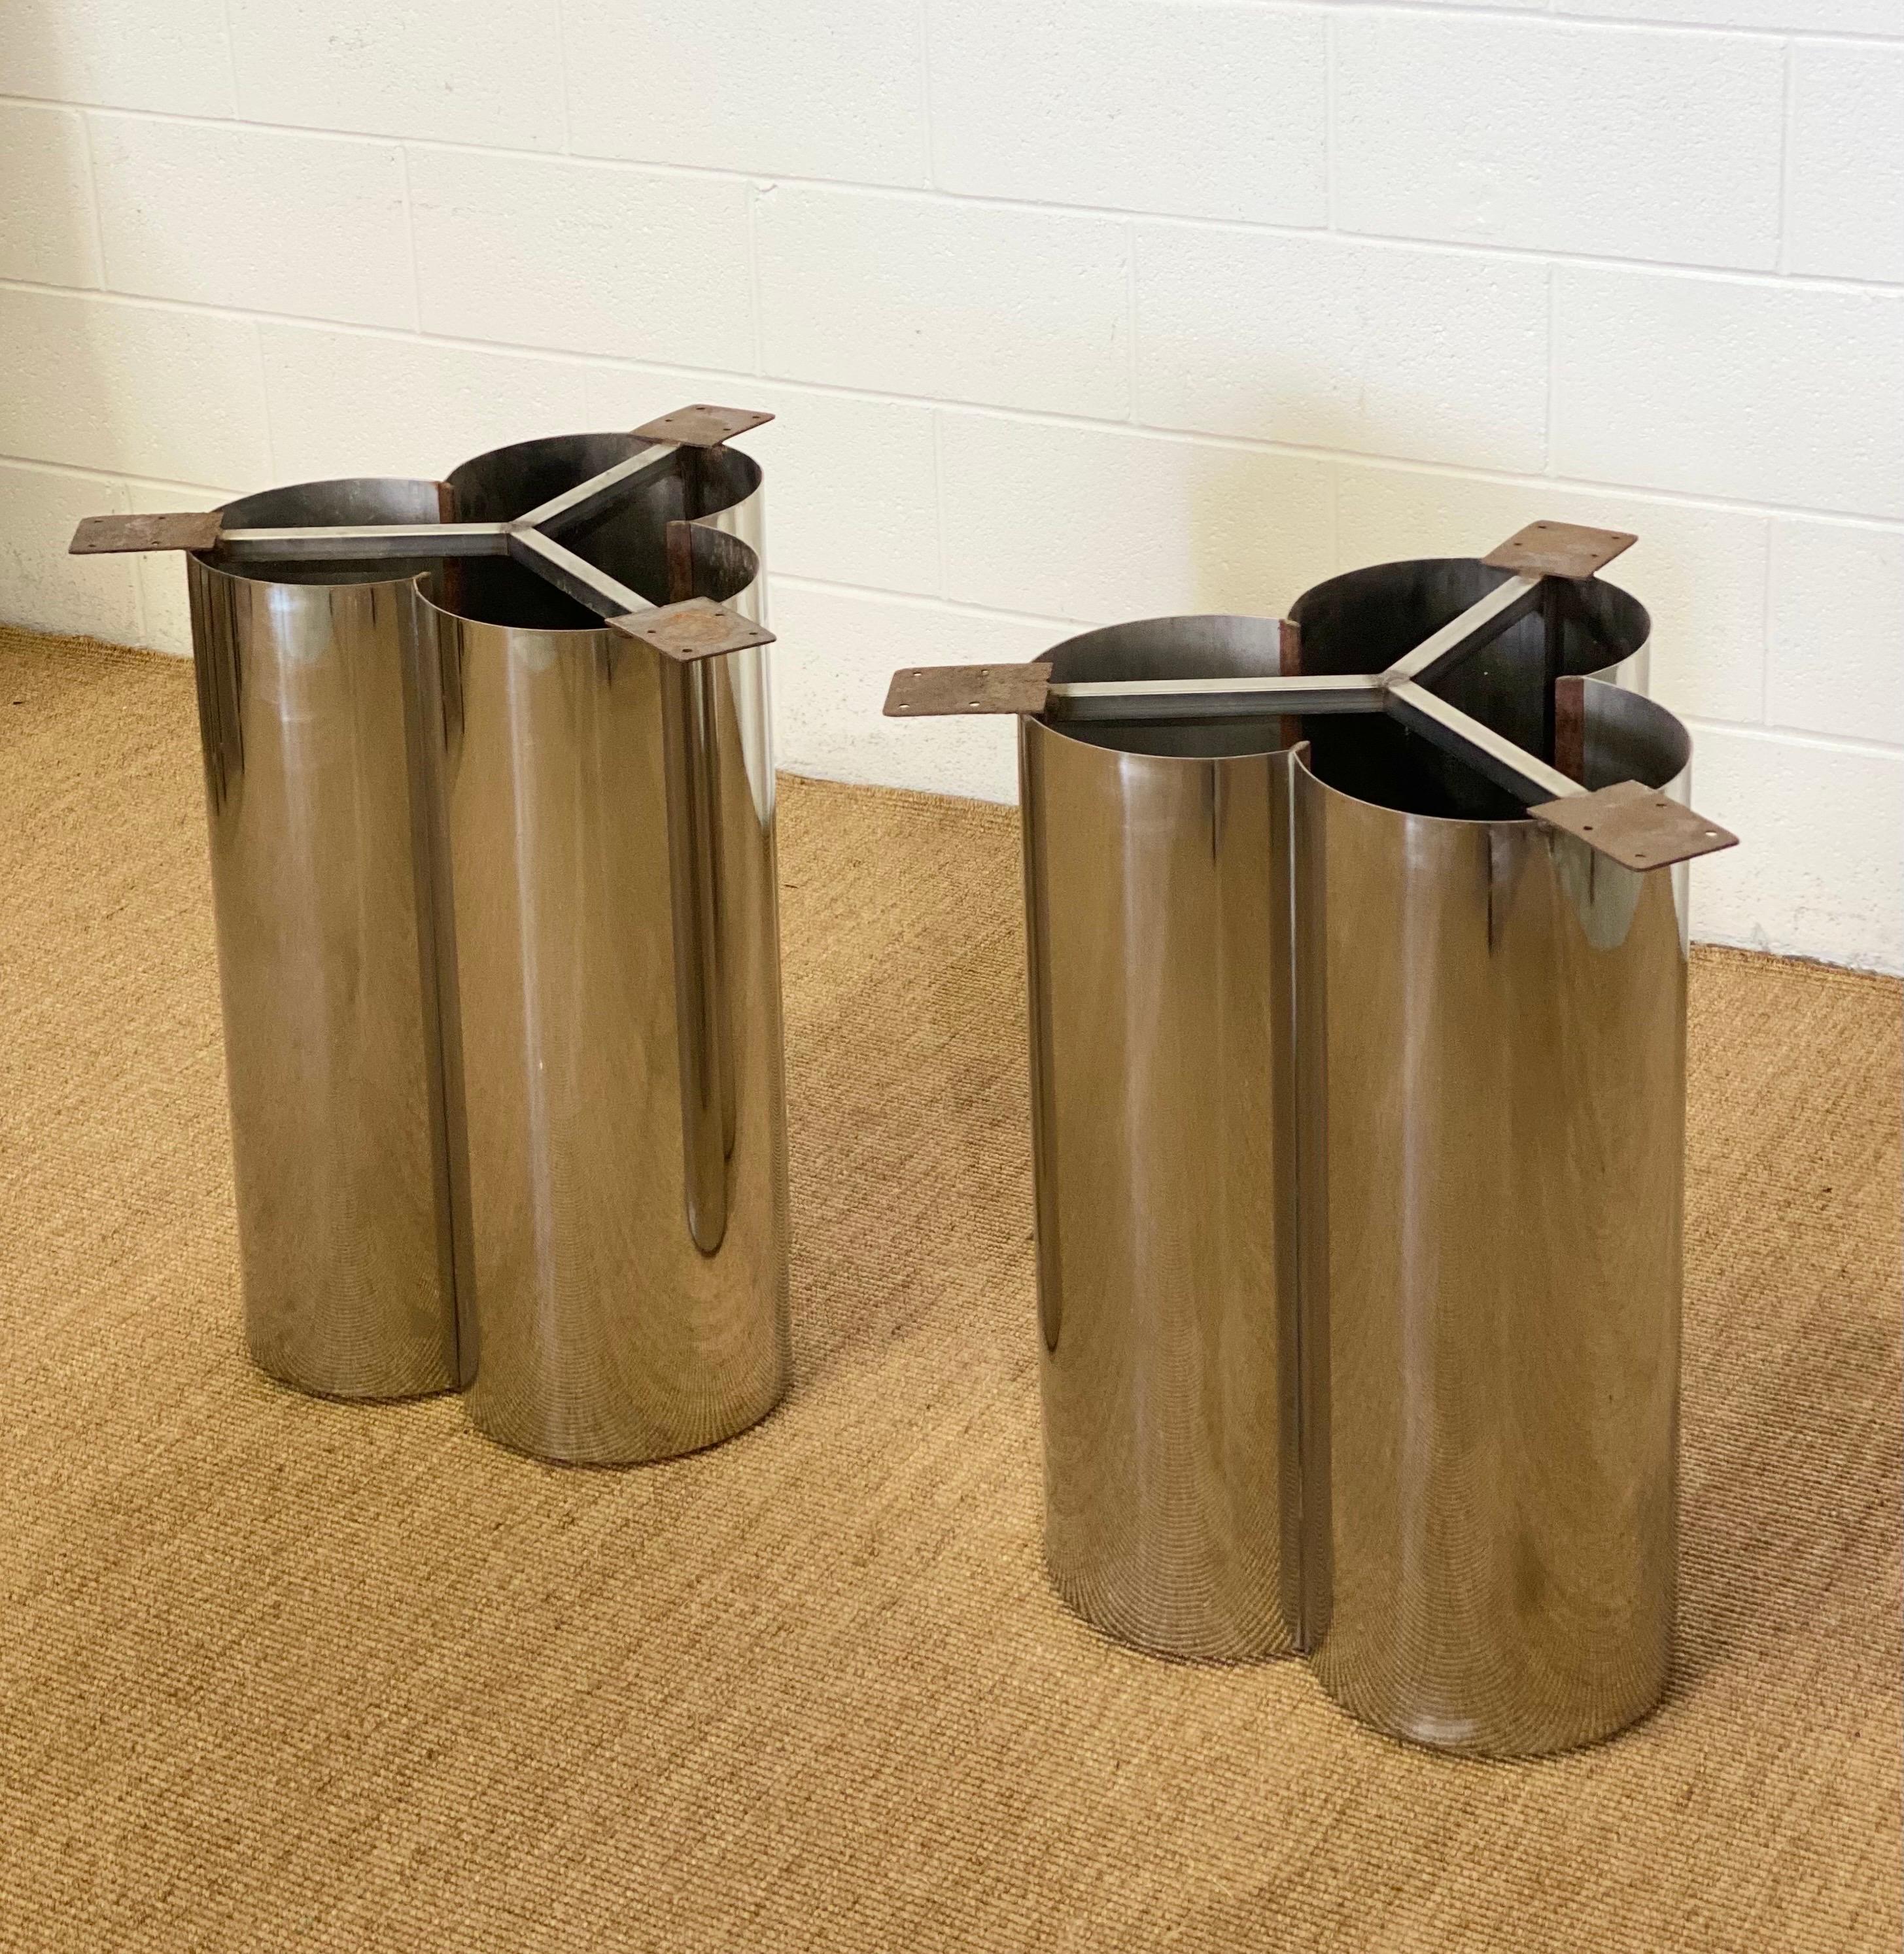 Late 20th Century 1970s Mastercraft Stainless Steel Table Pedestals – a Pair For Sale